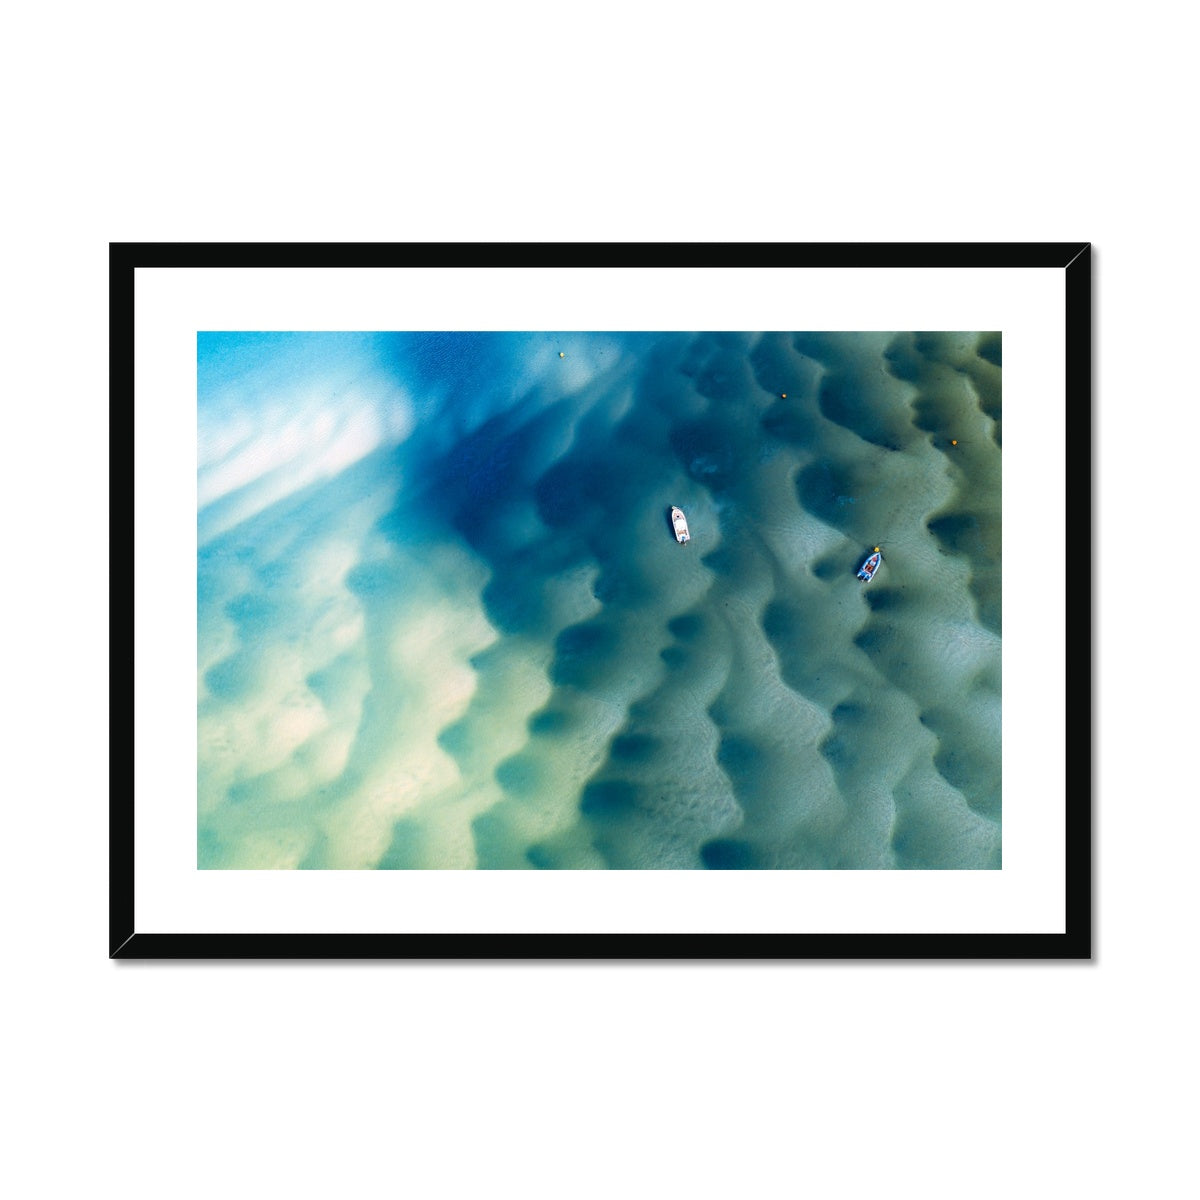 padstow ripples framed print